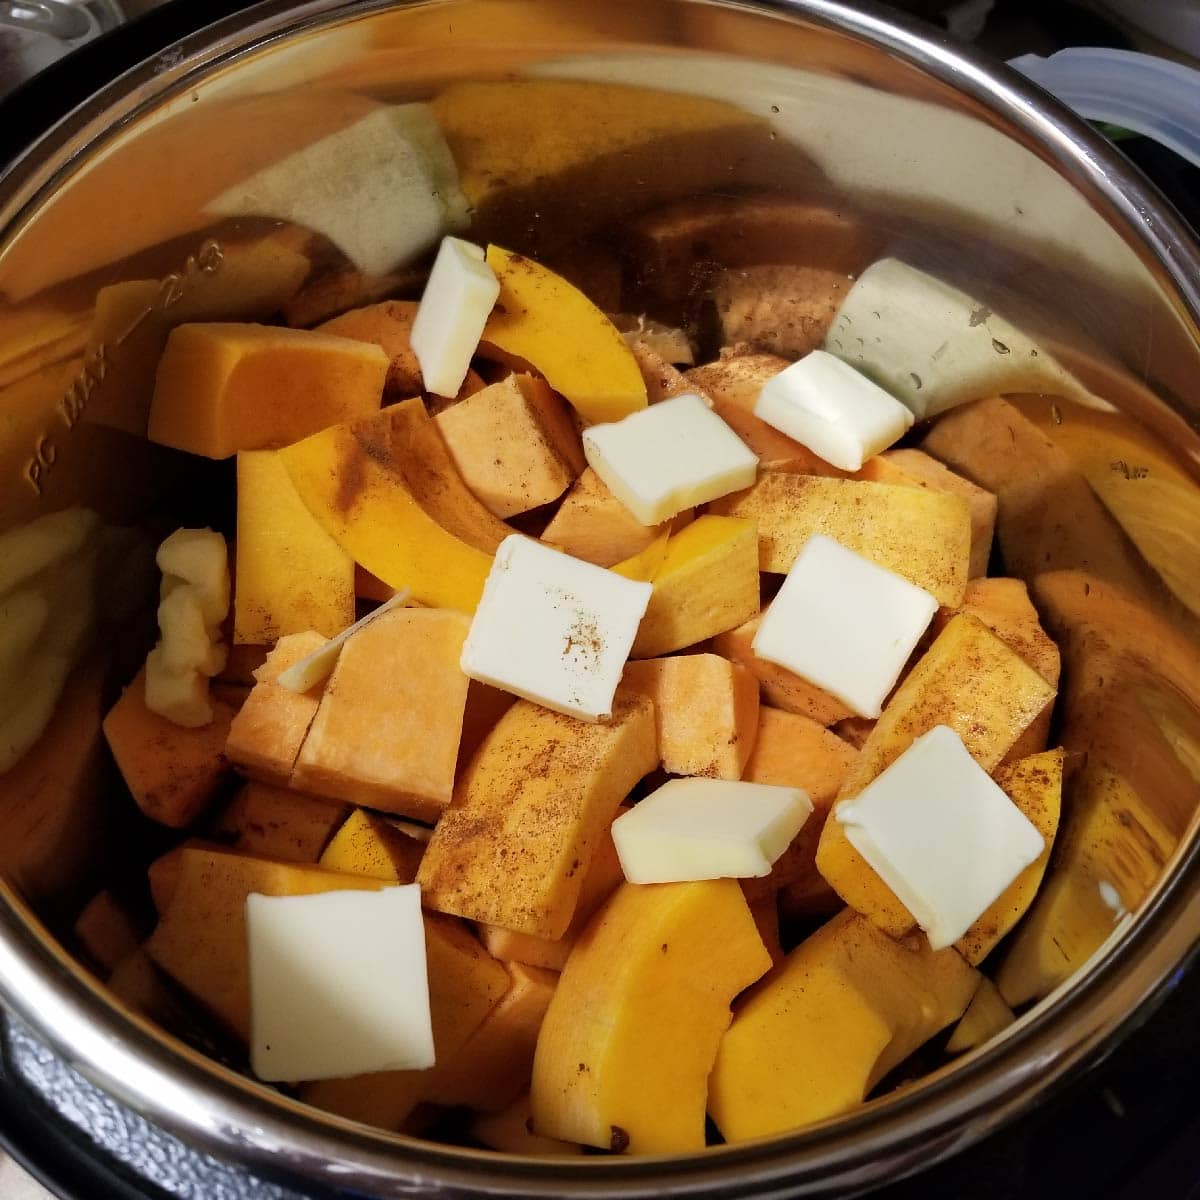 Butternut squash and sweet potatoes cut up into pieces with thin butter slices placed on top.  Nutmeg and cinnamon sprinkled on top.